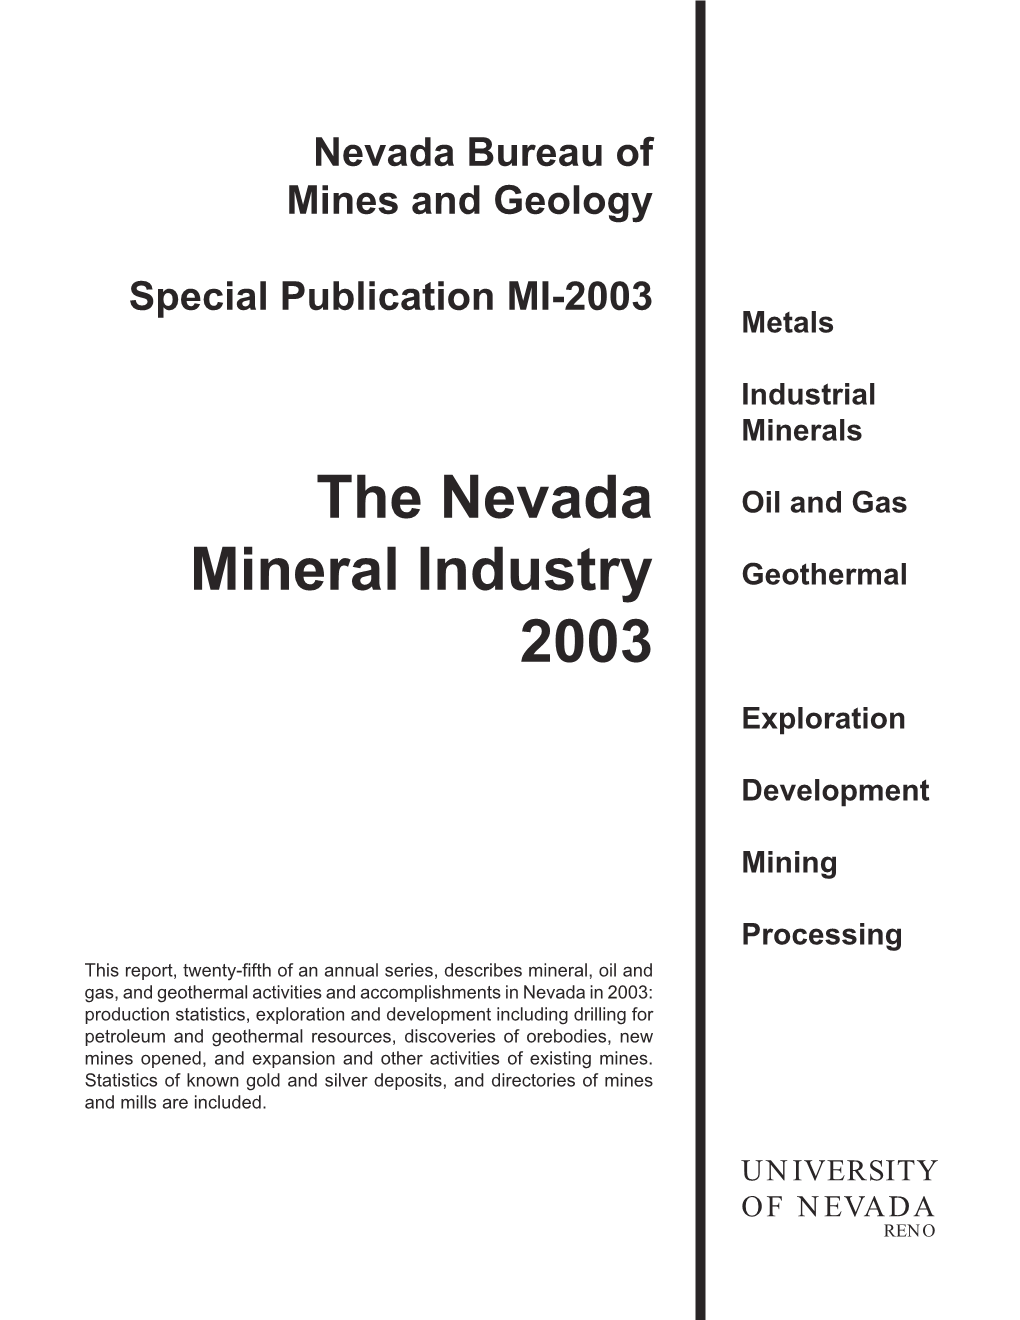 The Nevada Mineral Industry 2003